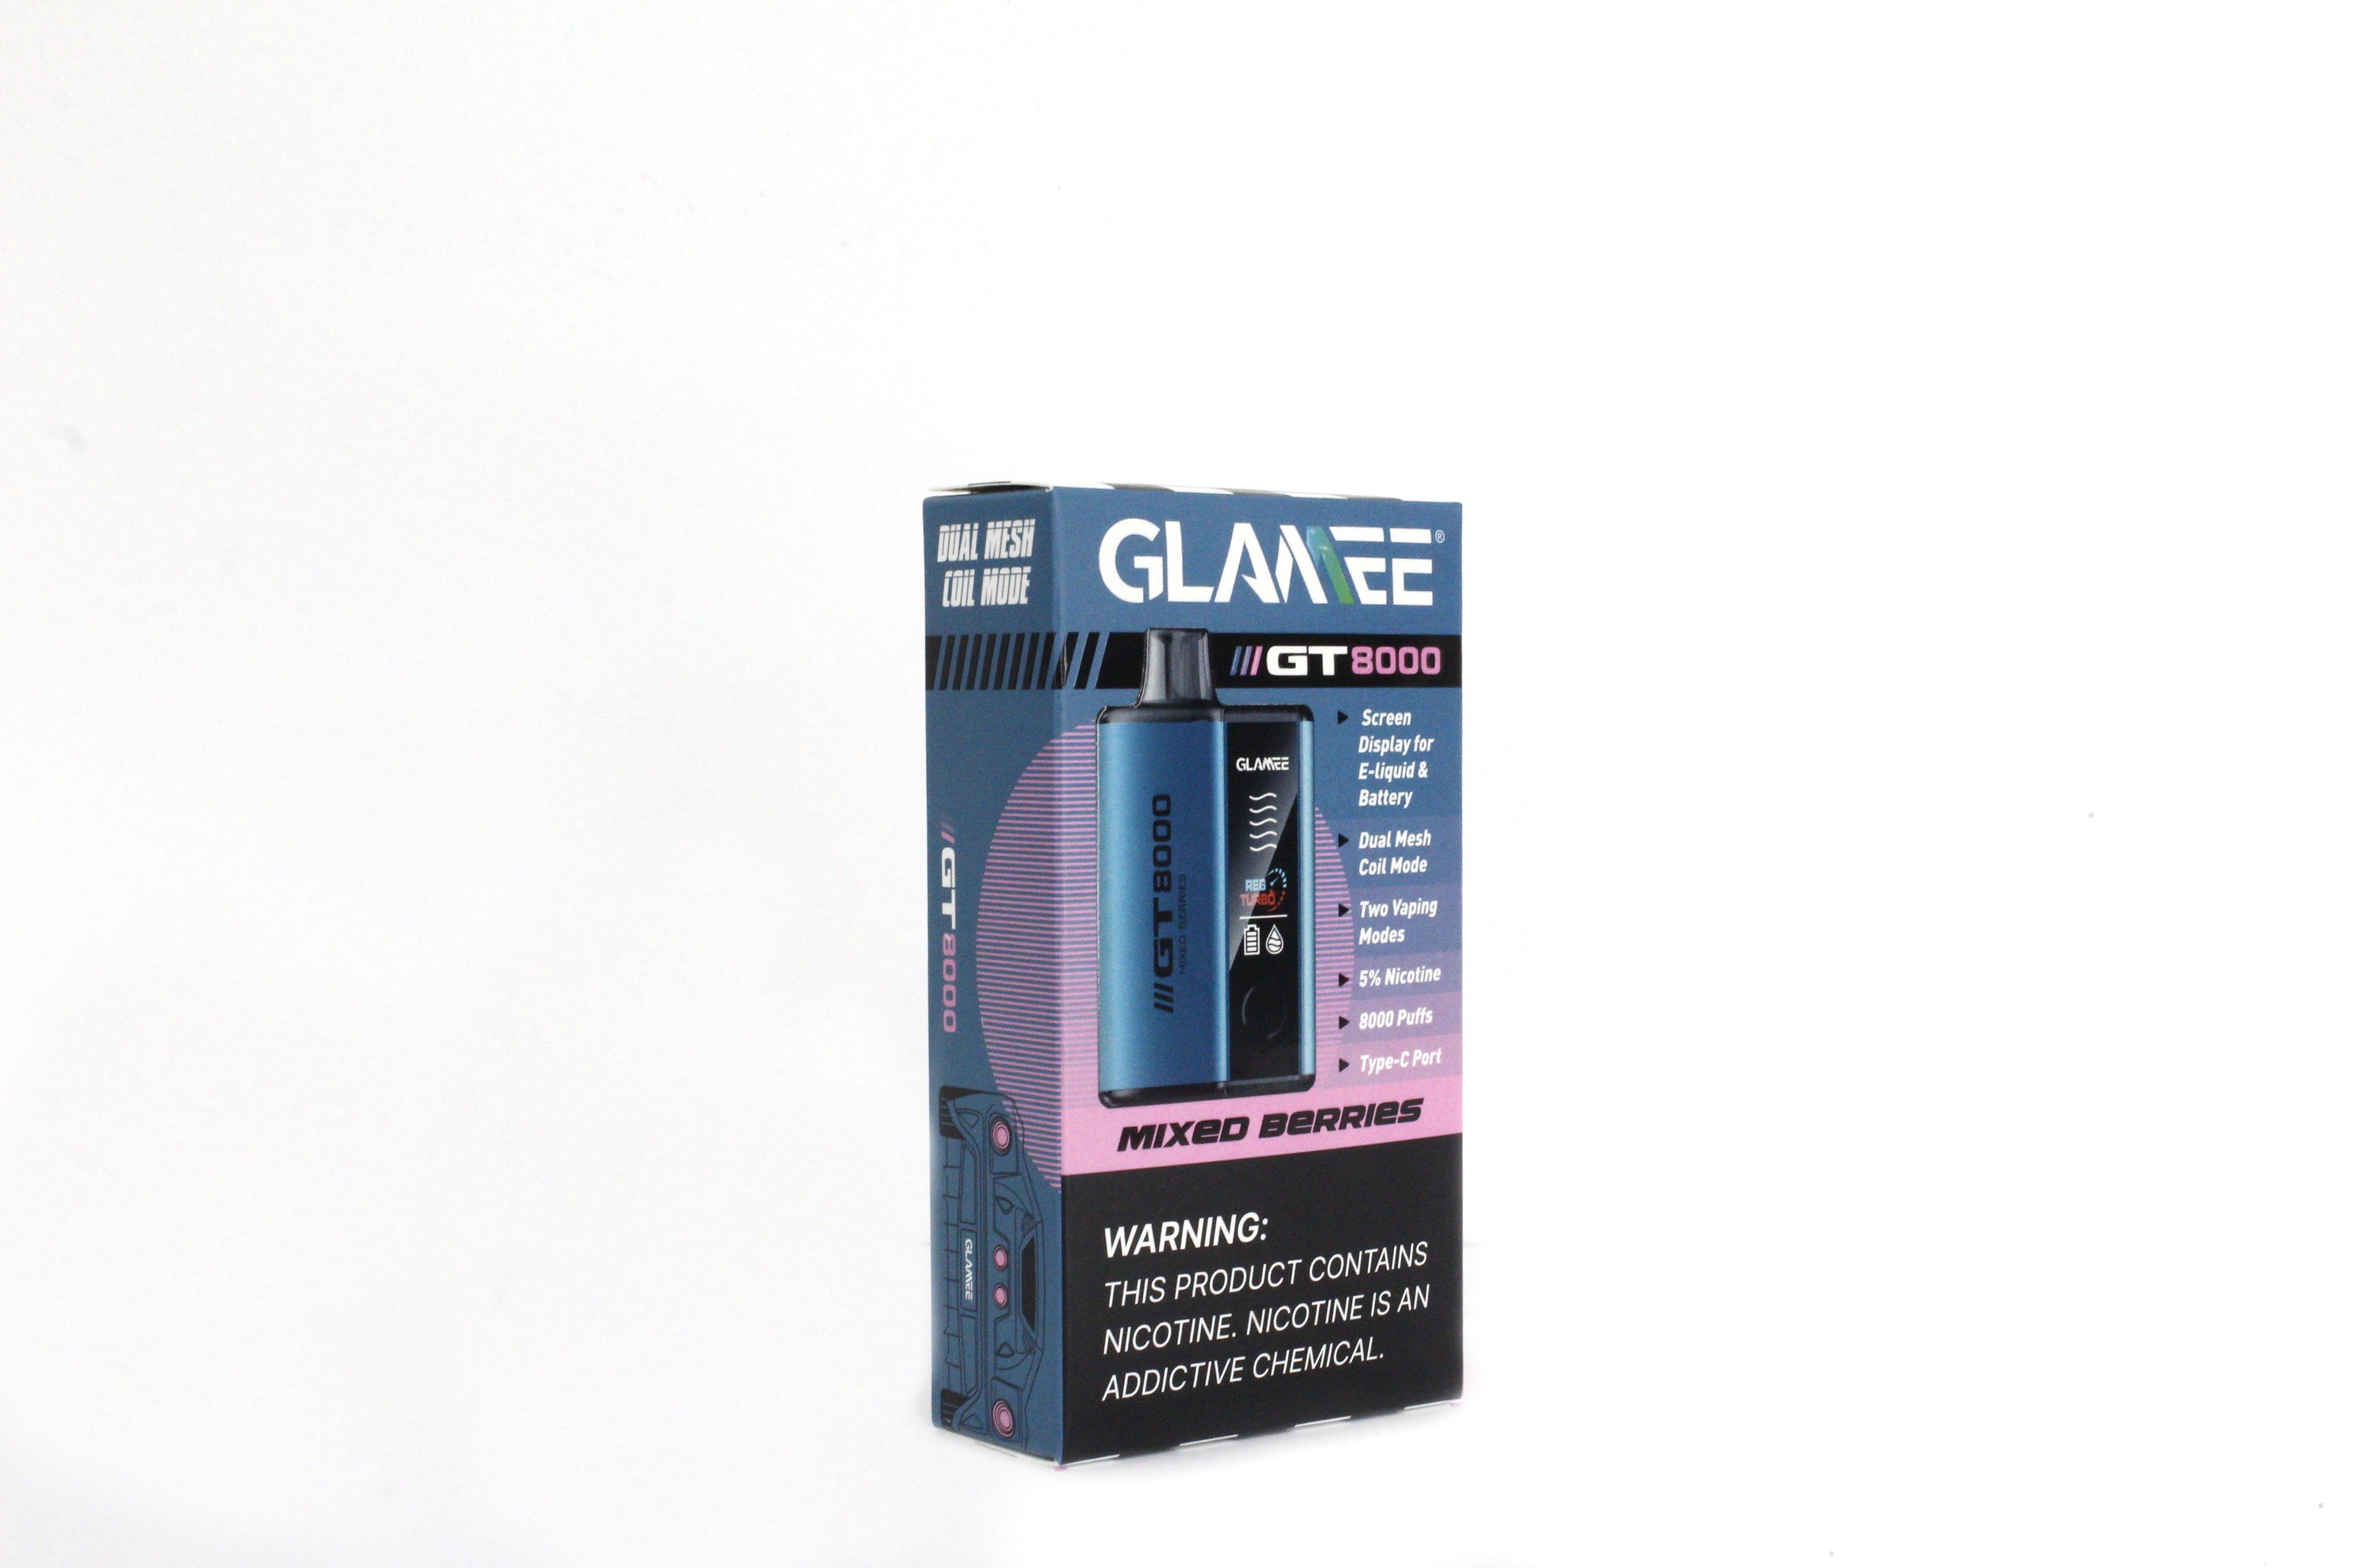 Glamee GT